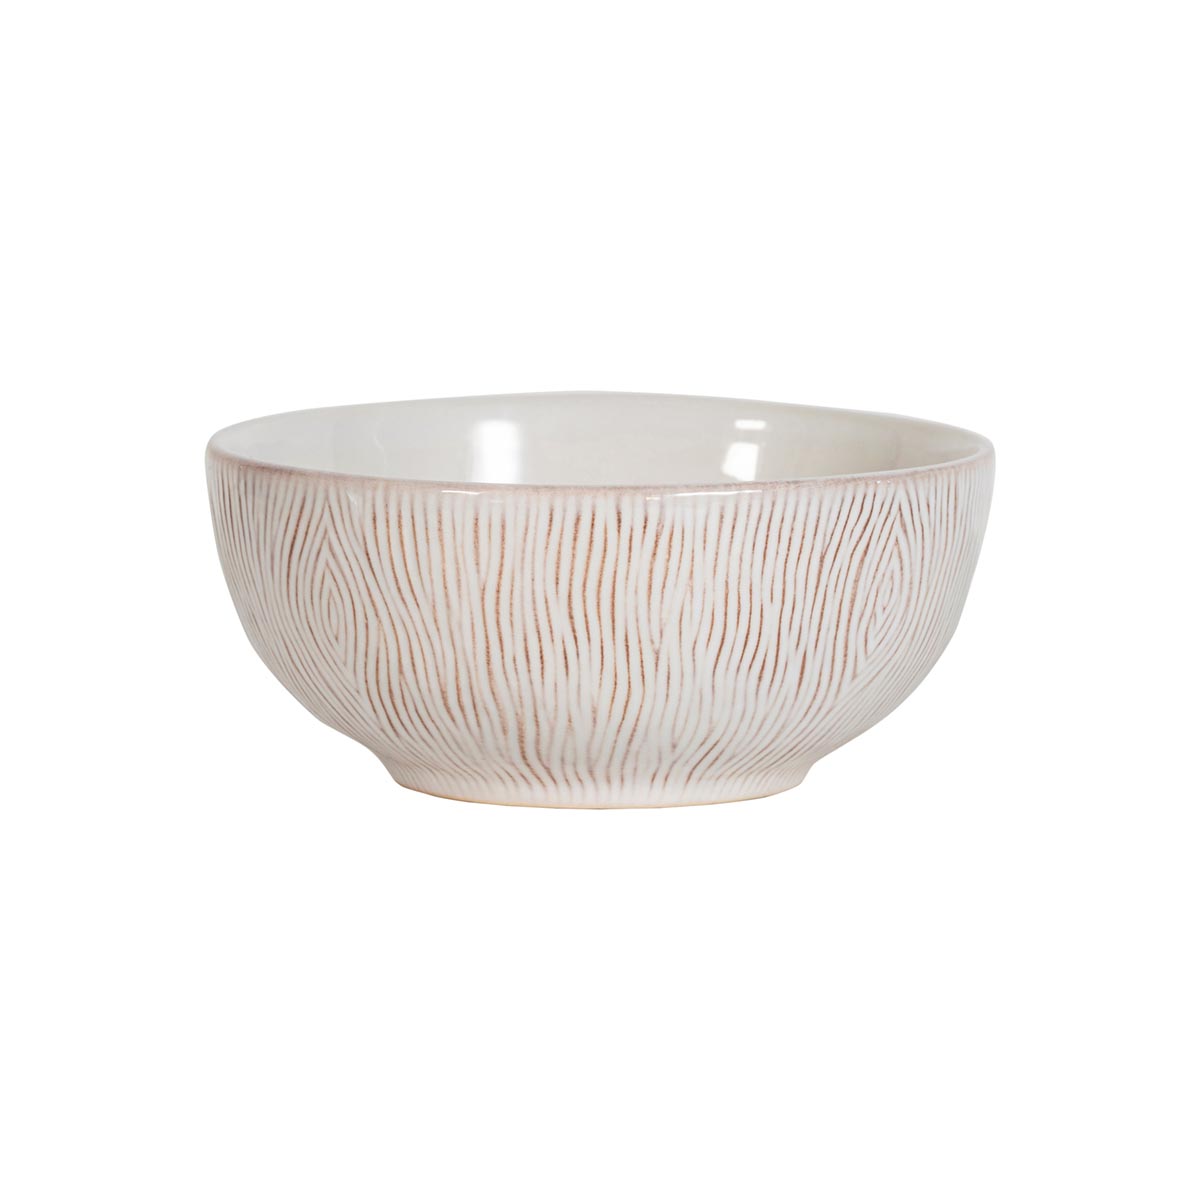 The rich woodgrain texture and creamy palette of this motif makes this bowl perfect for hearty servings of morning oats, savory sides, soups, and sweets.